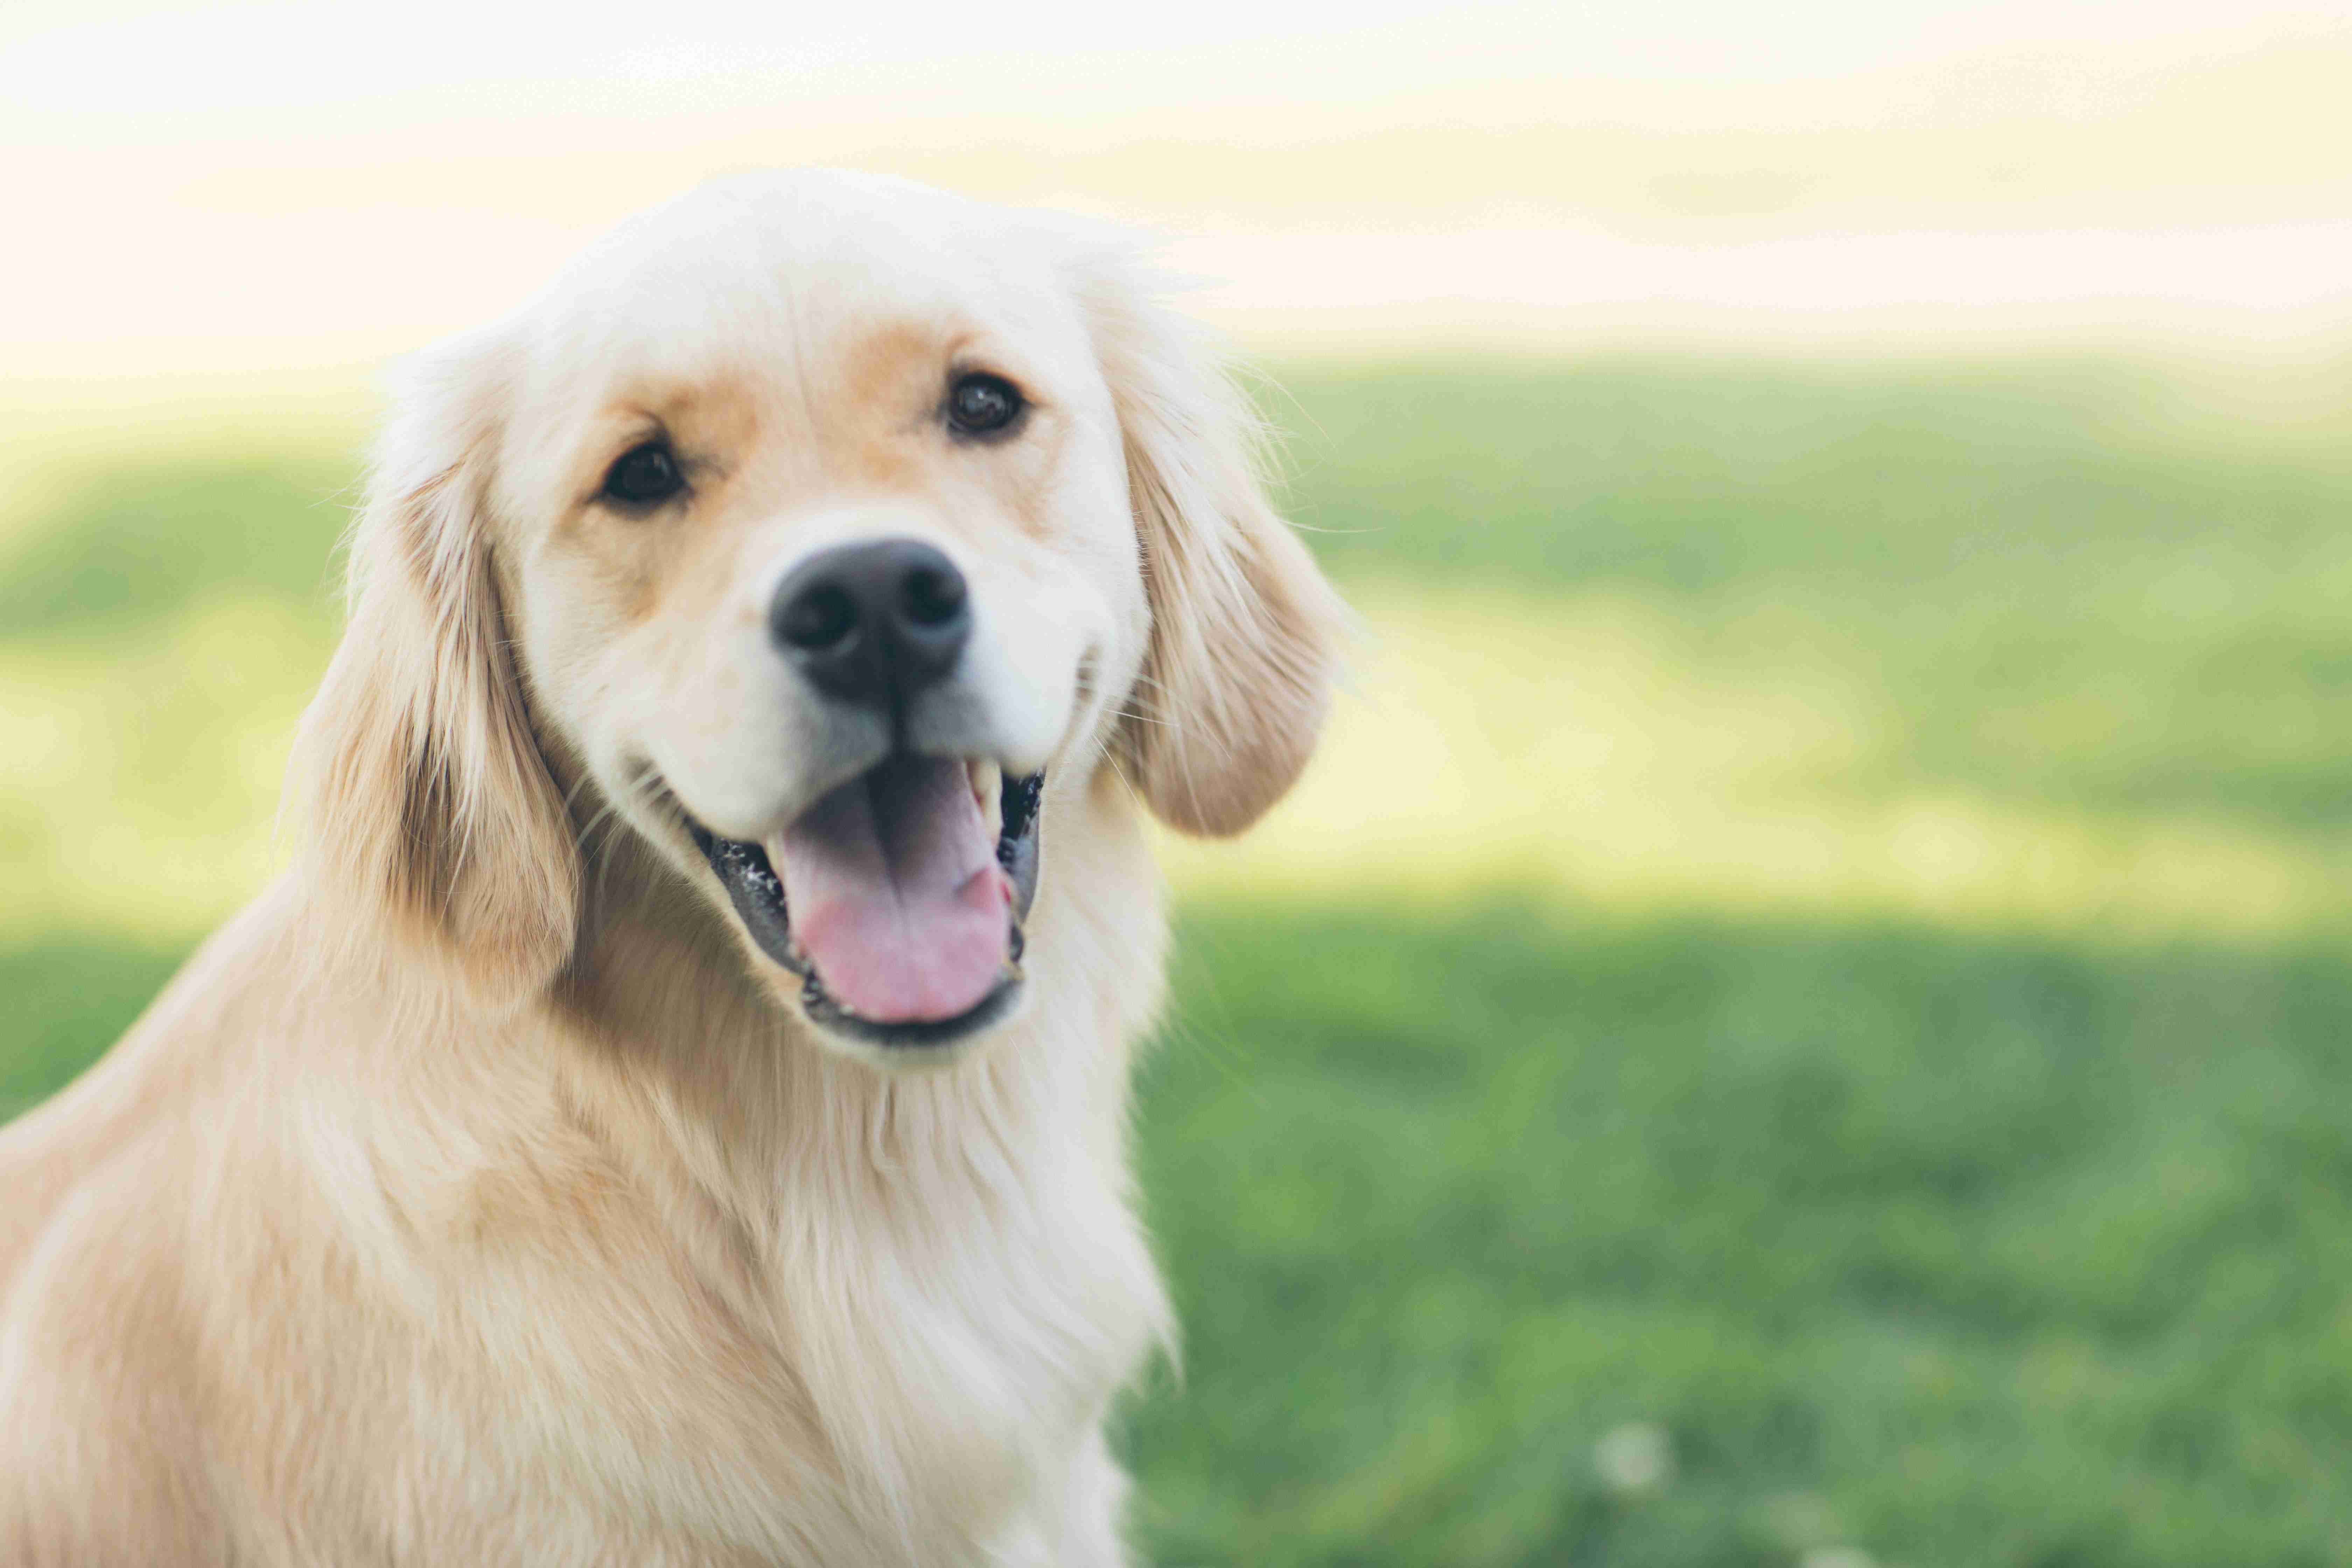 How can I socialize my Golden Retriever with other dogs and people?